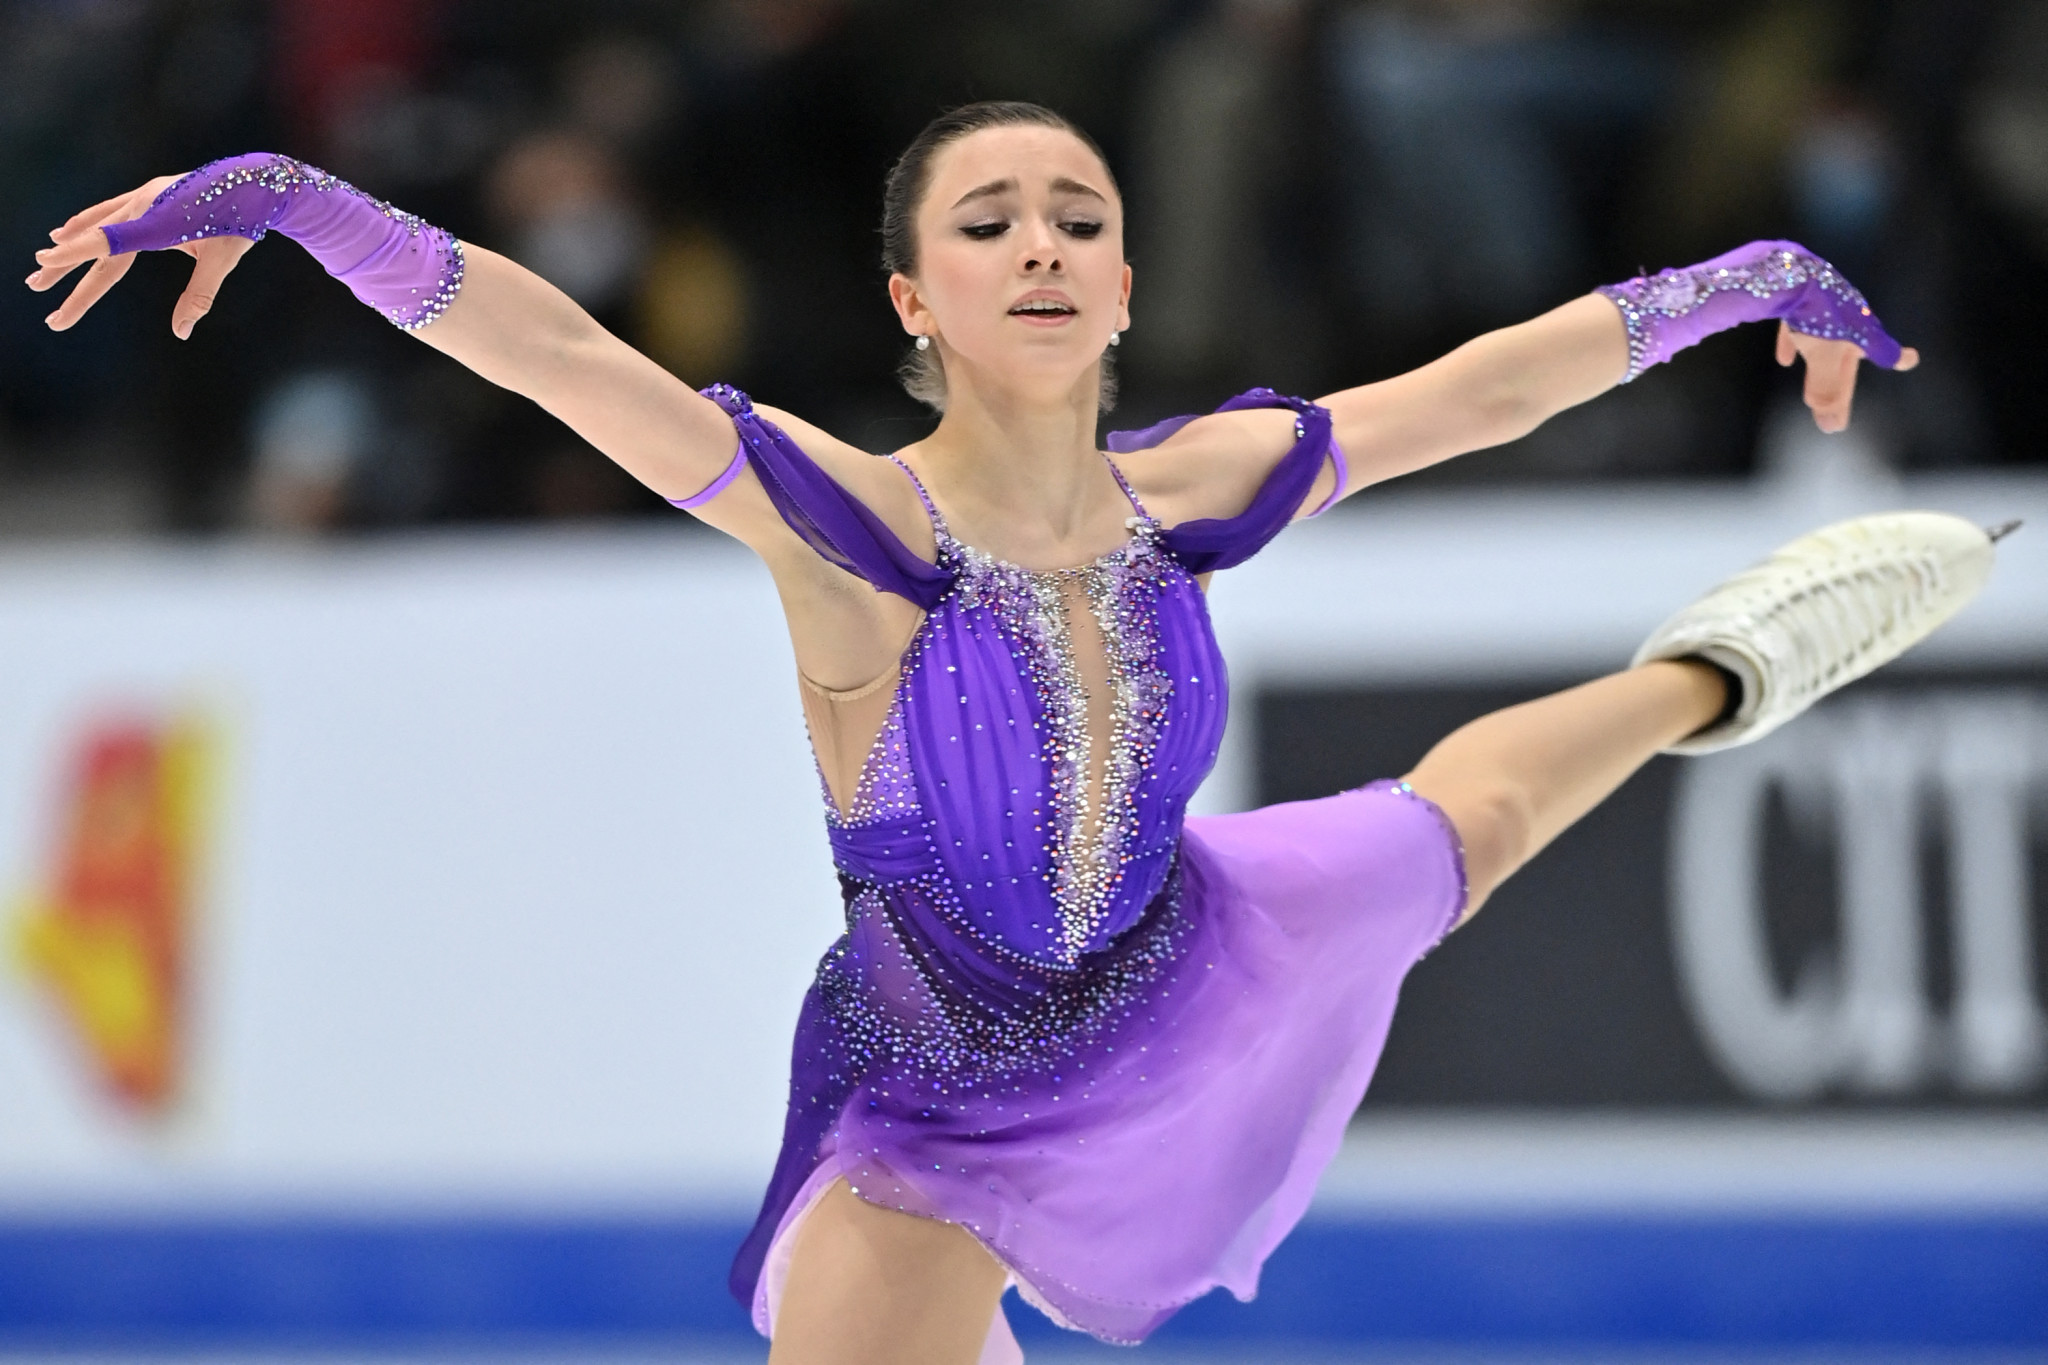 Kamila Valieva earned women's singles gold at the World Figure Skating Championships last year ©Getty Images